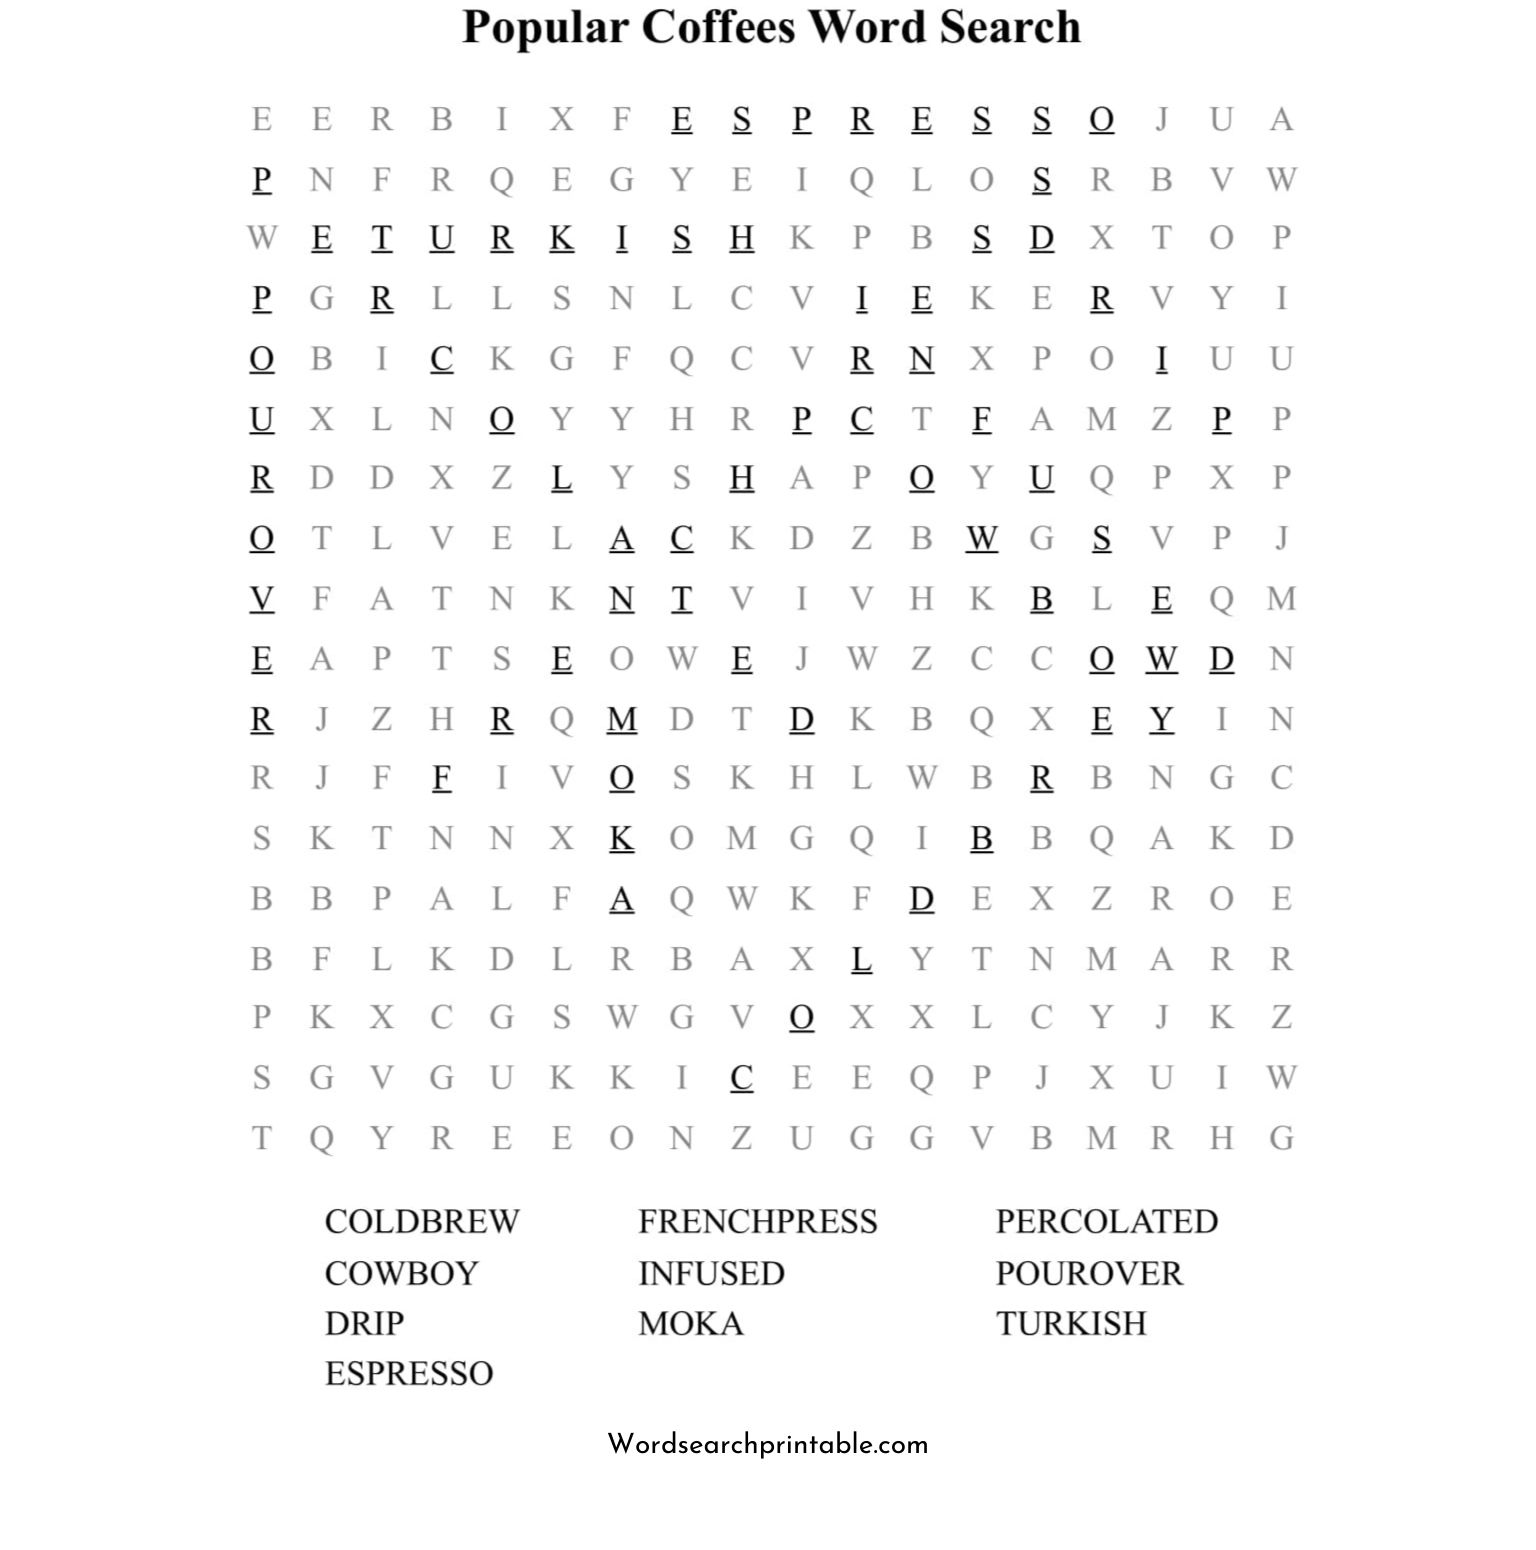 popular coffees word search puzzle solution